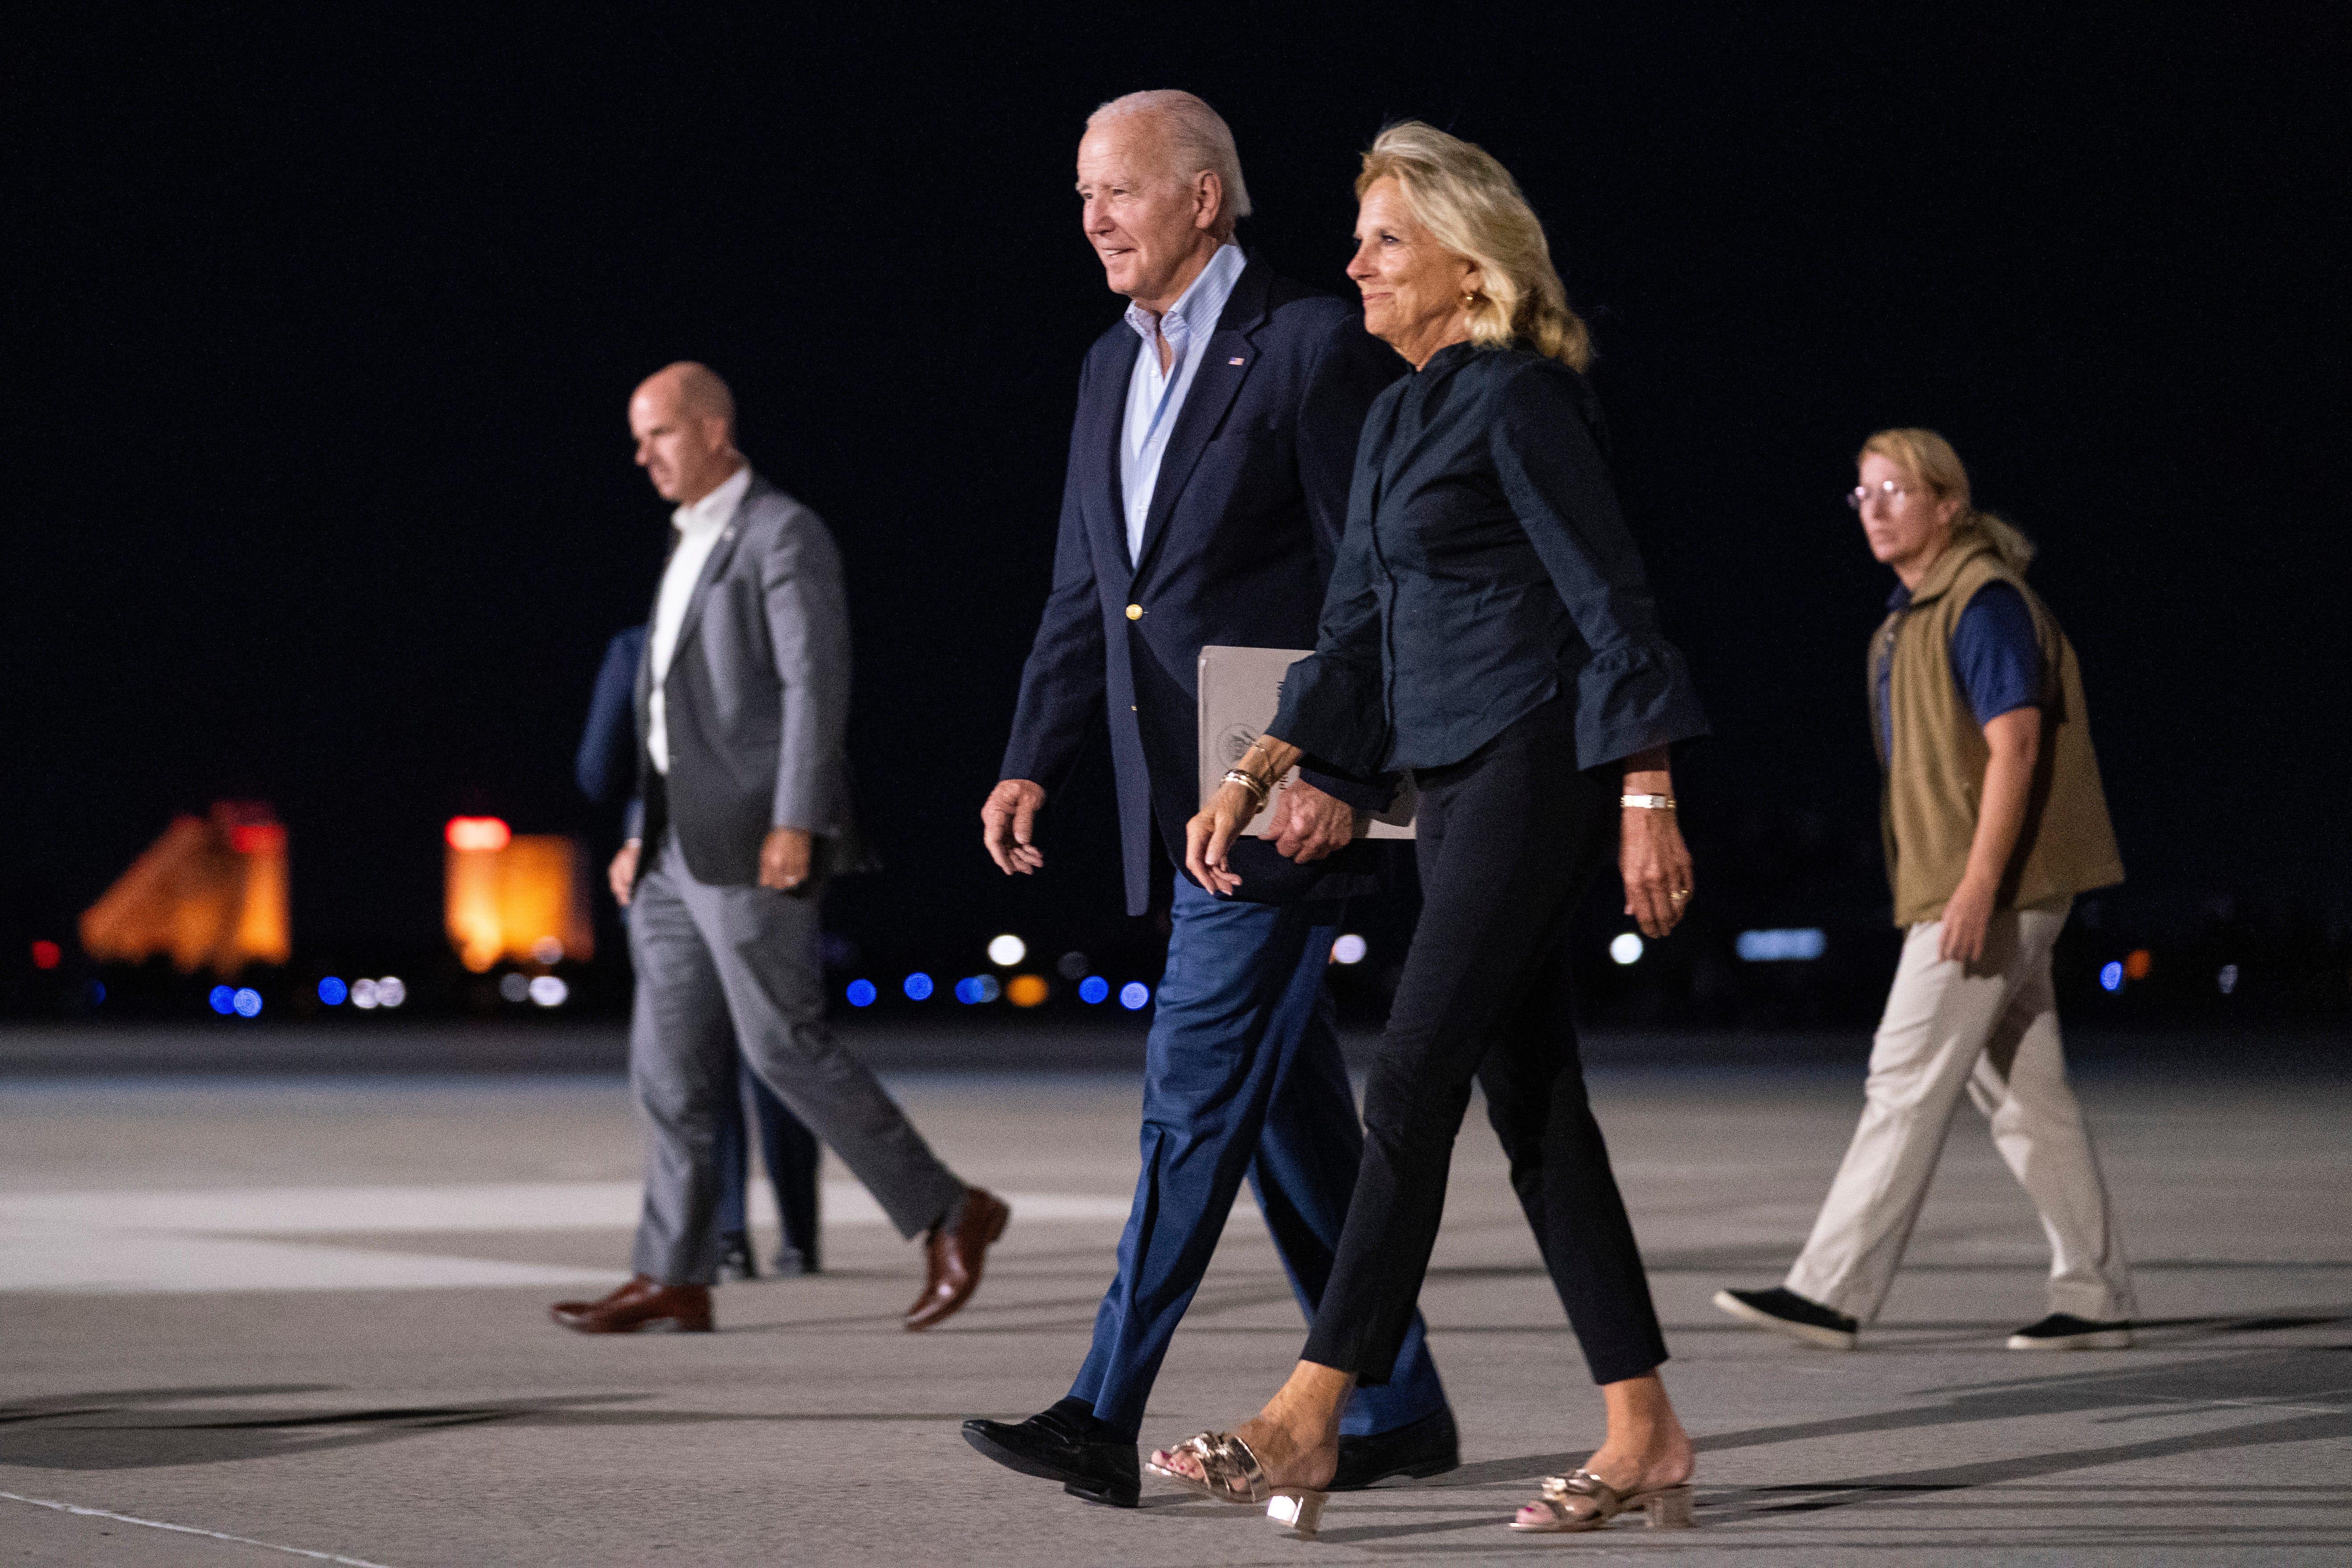 President Joe Biden and first lady Jill Biden arrive at Reno-Tahoe International Airport on Friday, Aug. 18, 2023, in Reno, Nev., for a vacation in the area. (AP Photo/Evan Vucci)